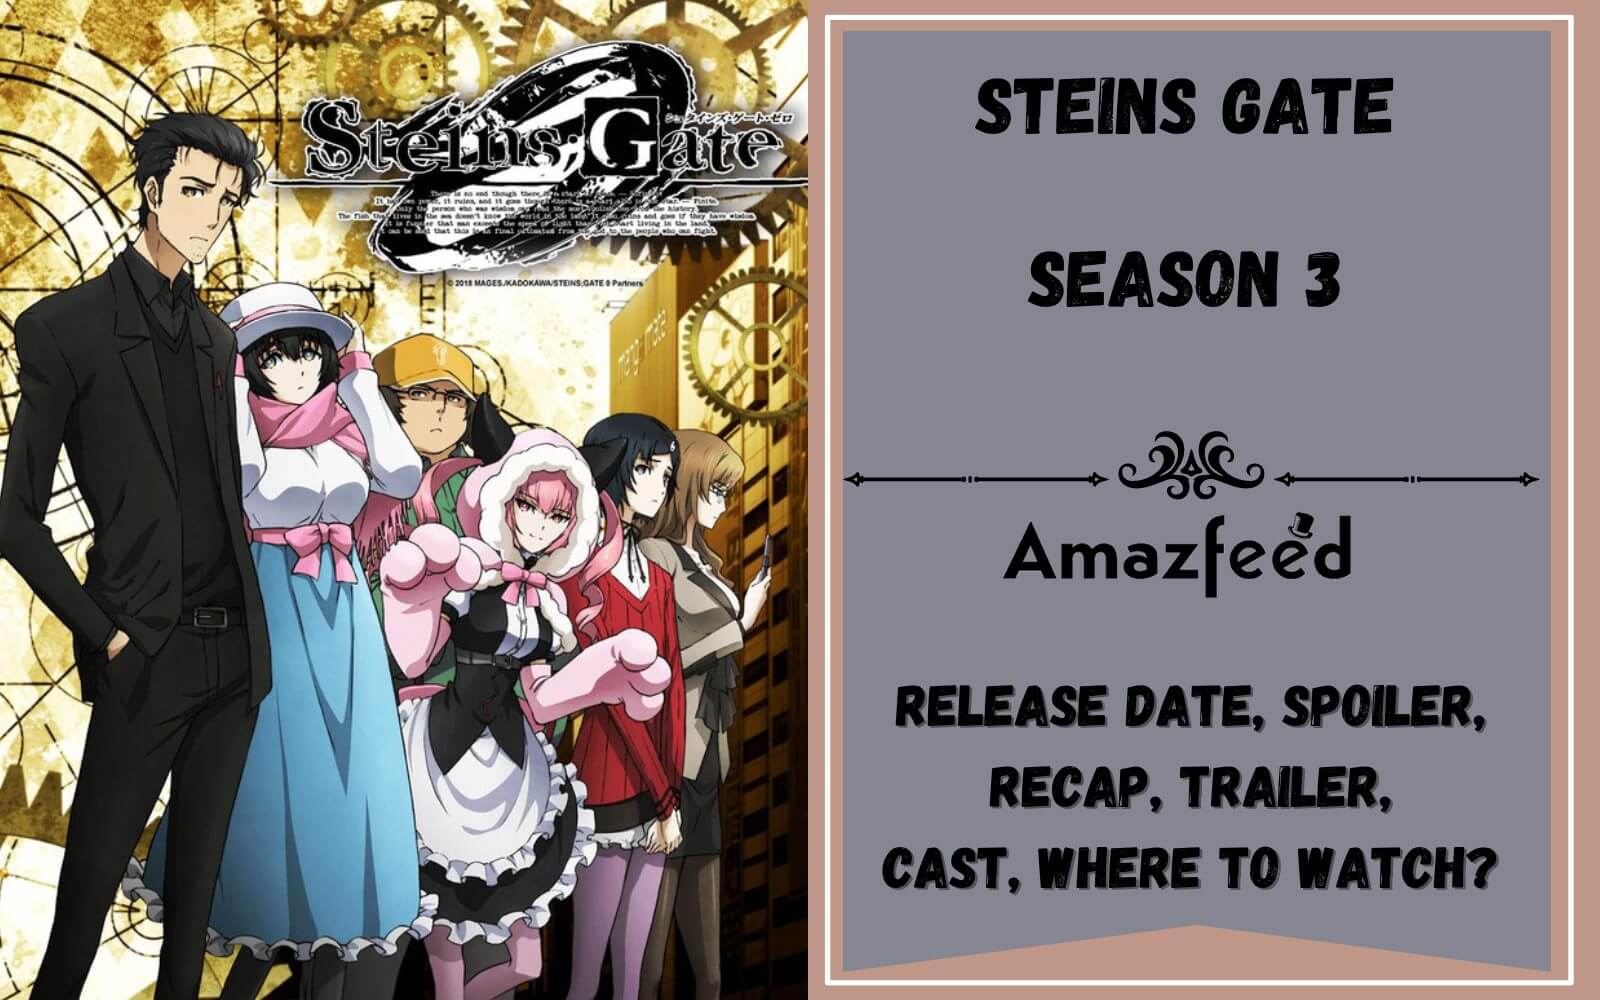 What We Know about Gate Season 3